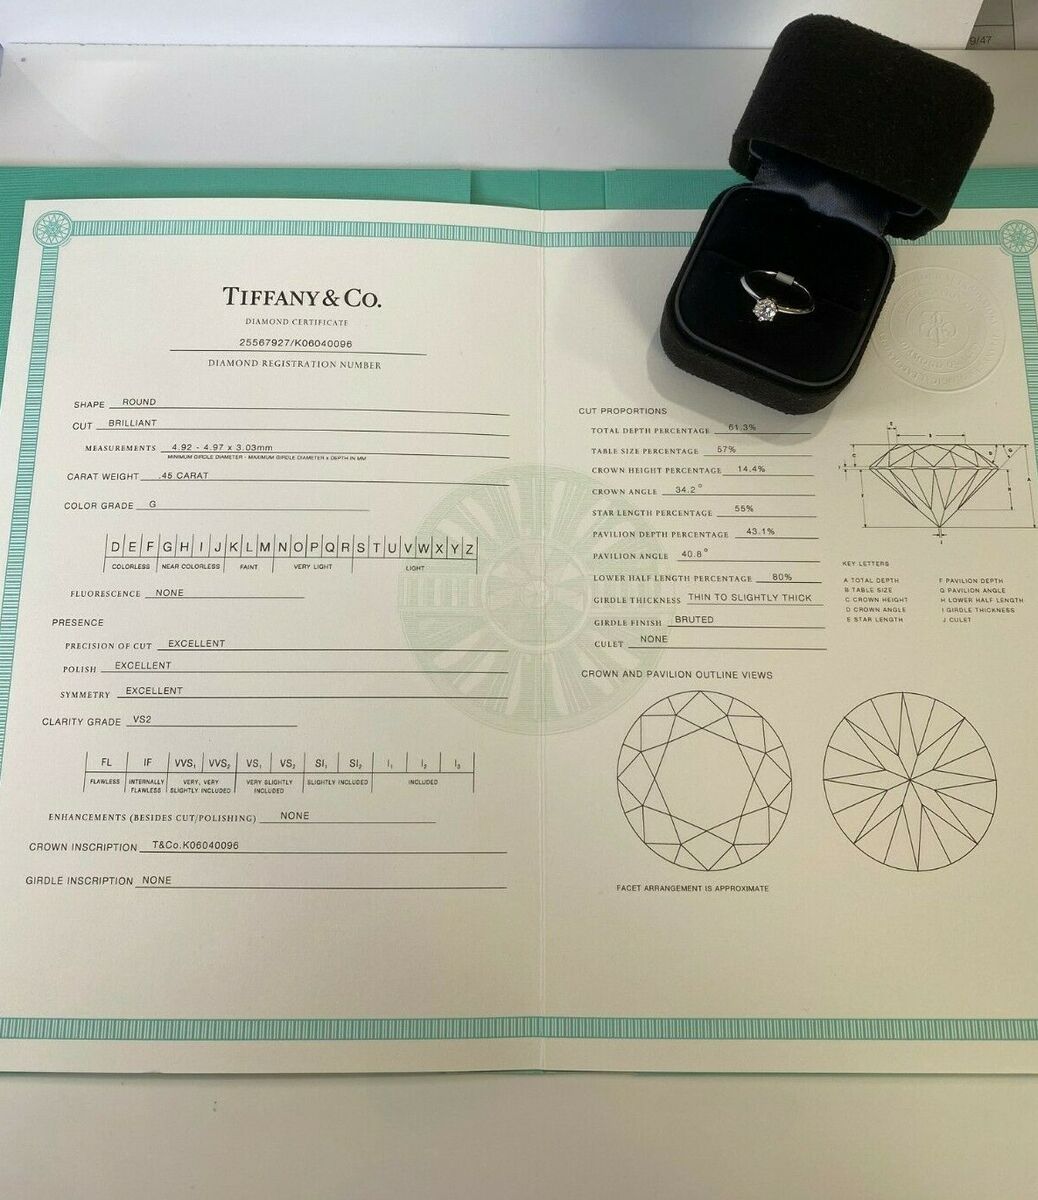 Authentic Tiffany & Co. Solitair Engagement Ring 0.45 carat G VS2 Diamond  Size 5